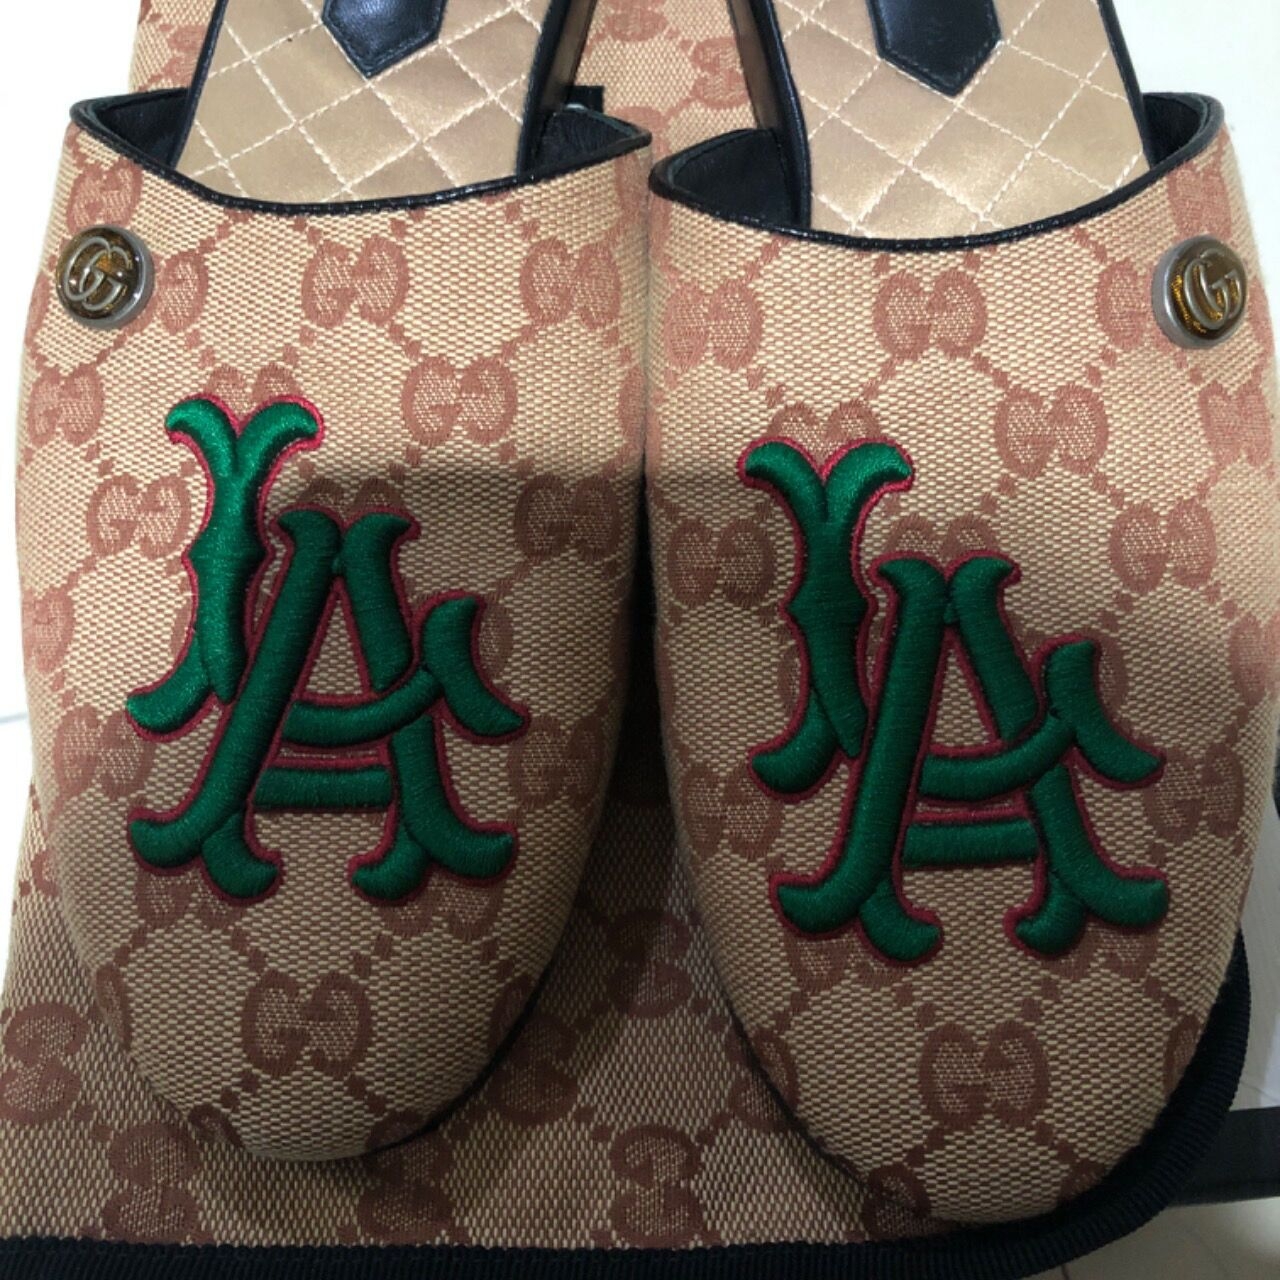 Gucci Monogram La Dodgers Embroidered Womens Gg Slippers